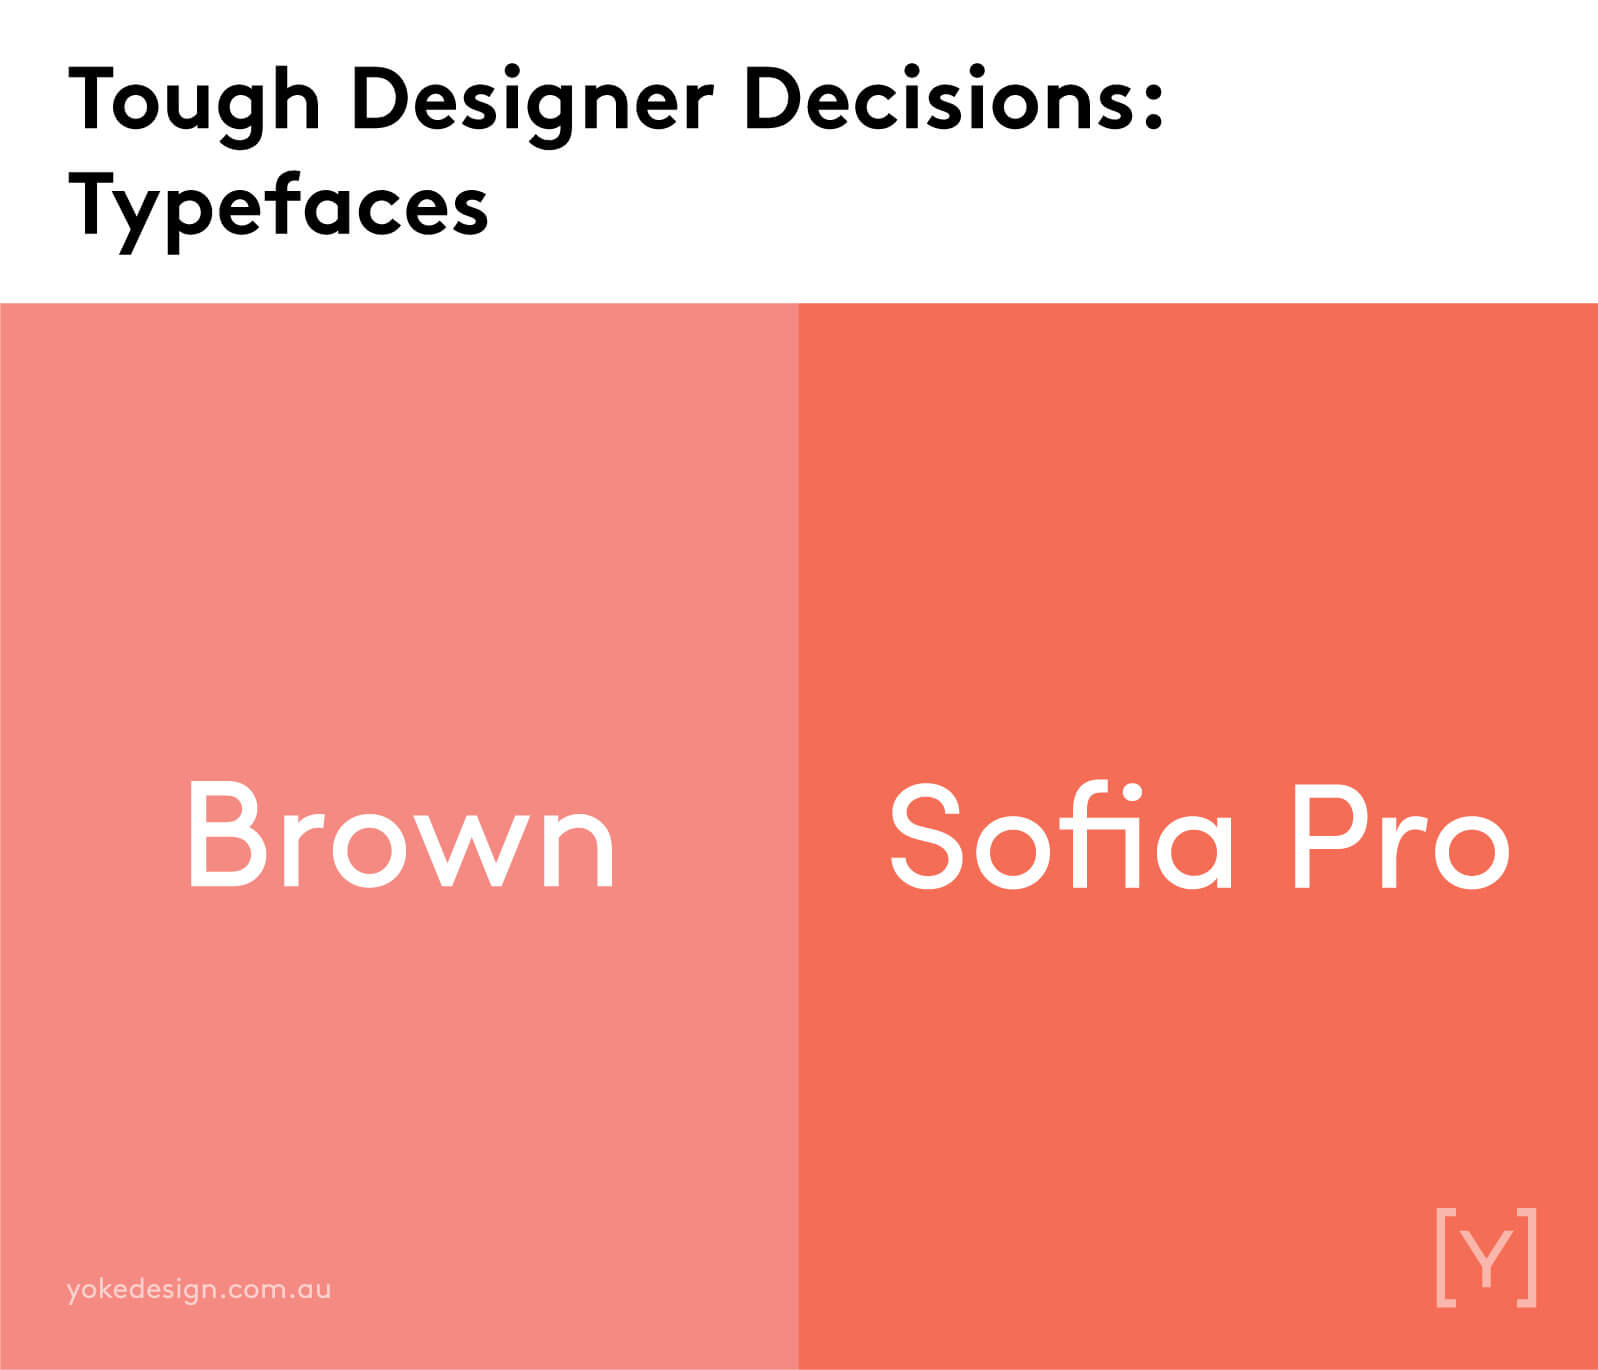 9 Tough Decisions of Designer Every Day-CGfrog-4